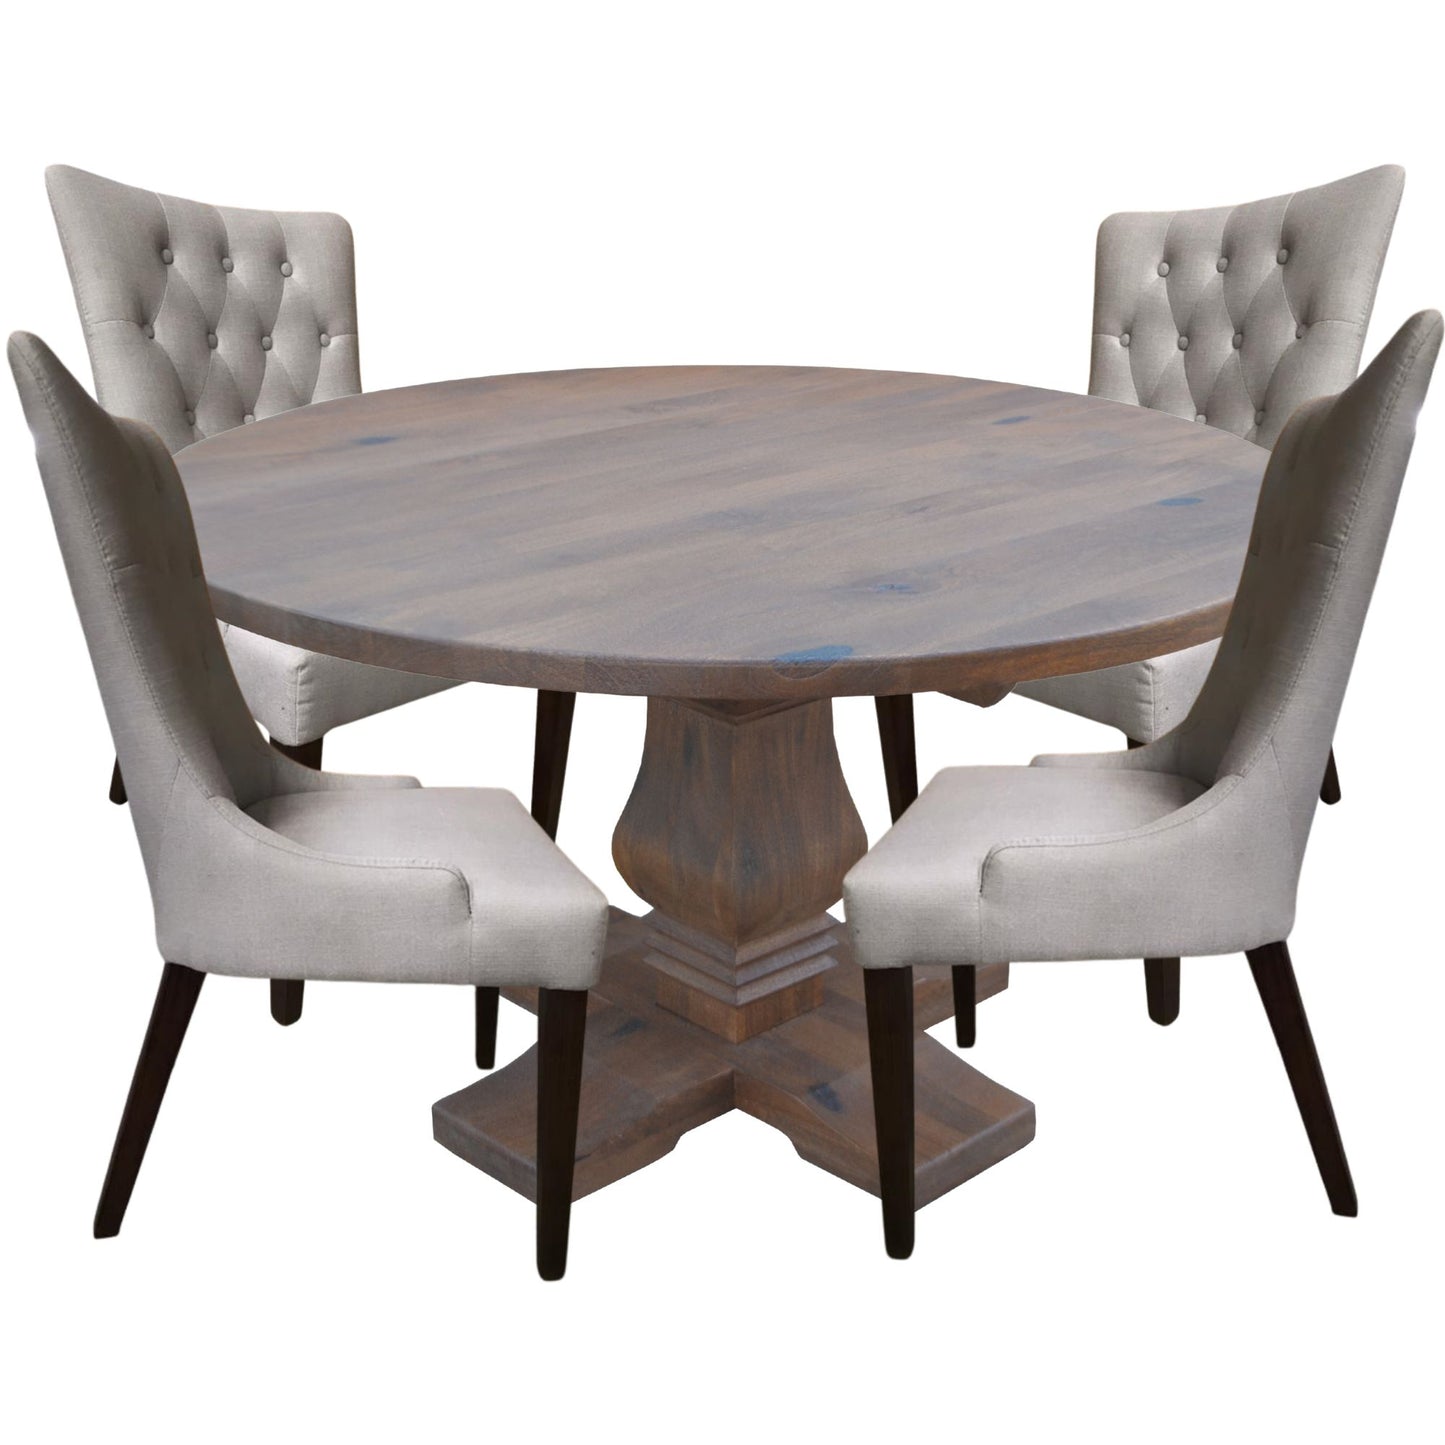 Florence 5pc French Provincial Round Dining Table 135cm